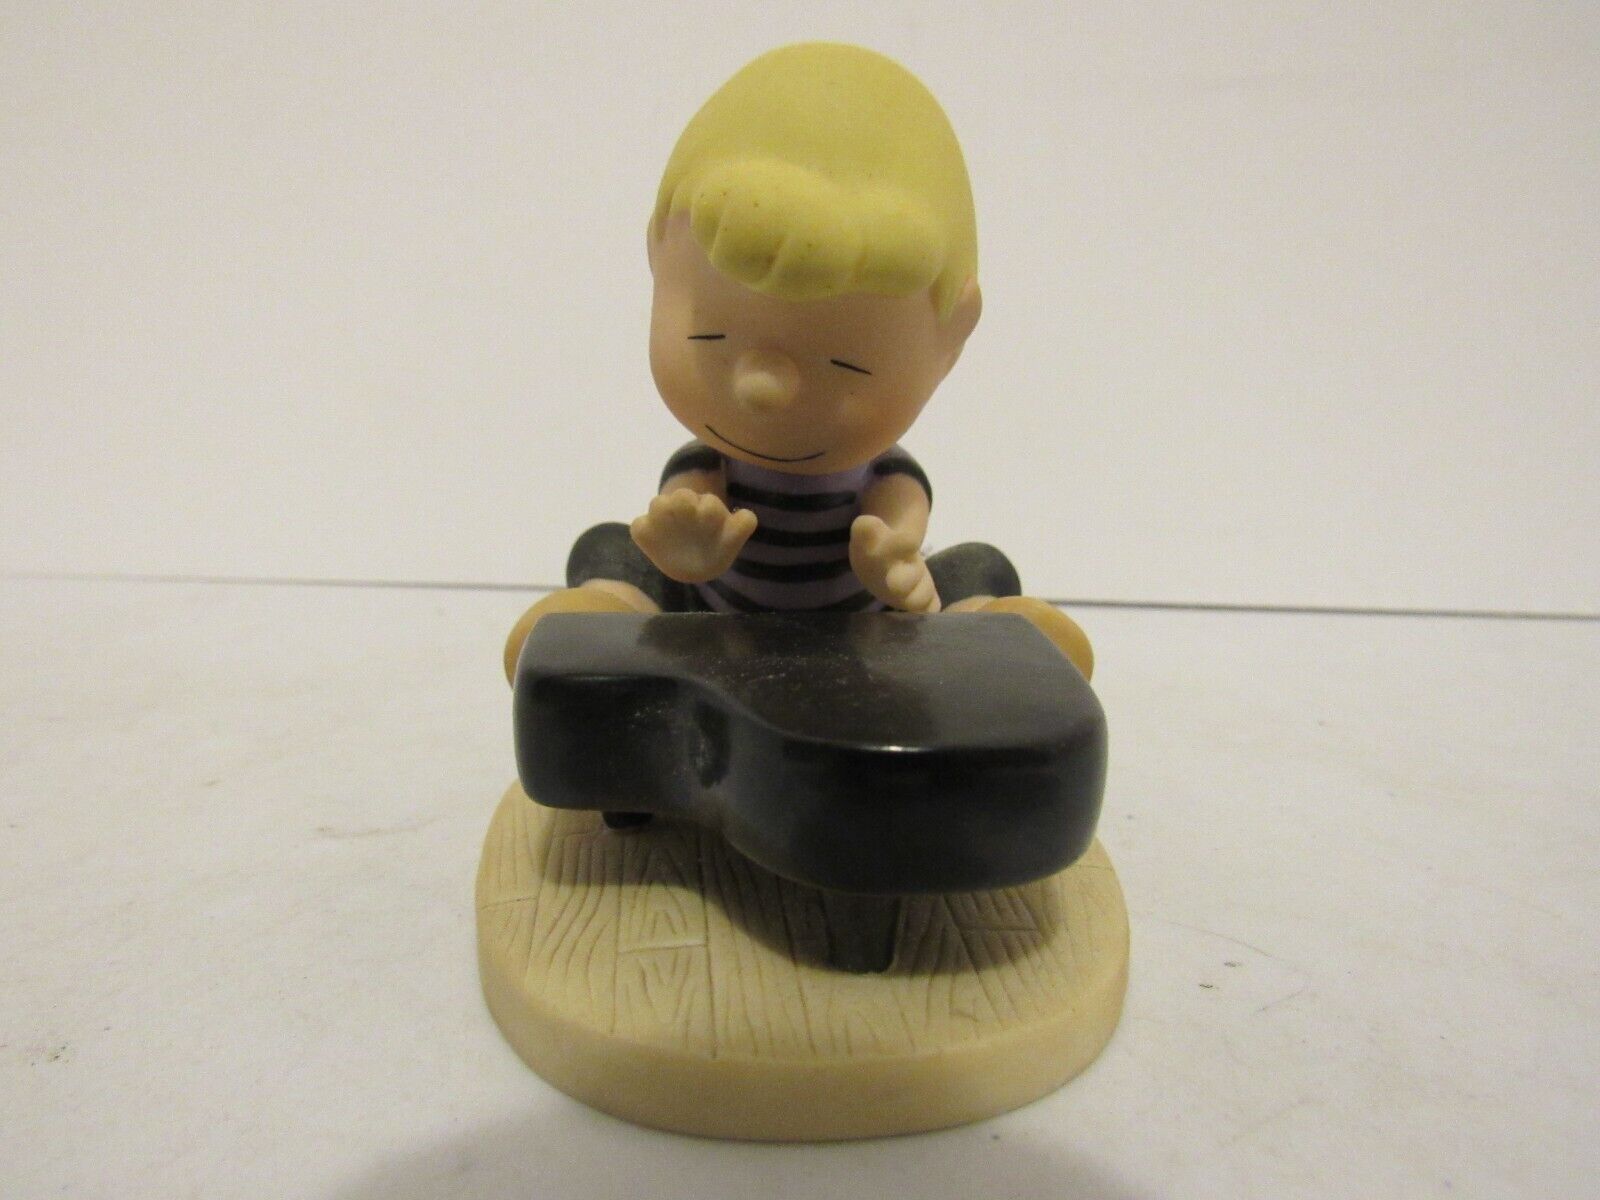 Westland Giftware #8220 Peanuts Schroeder Playing Piano Porcelain Figurine